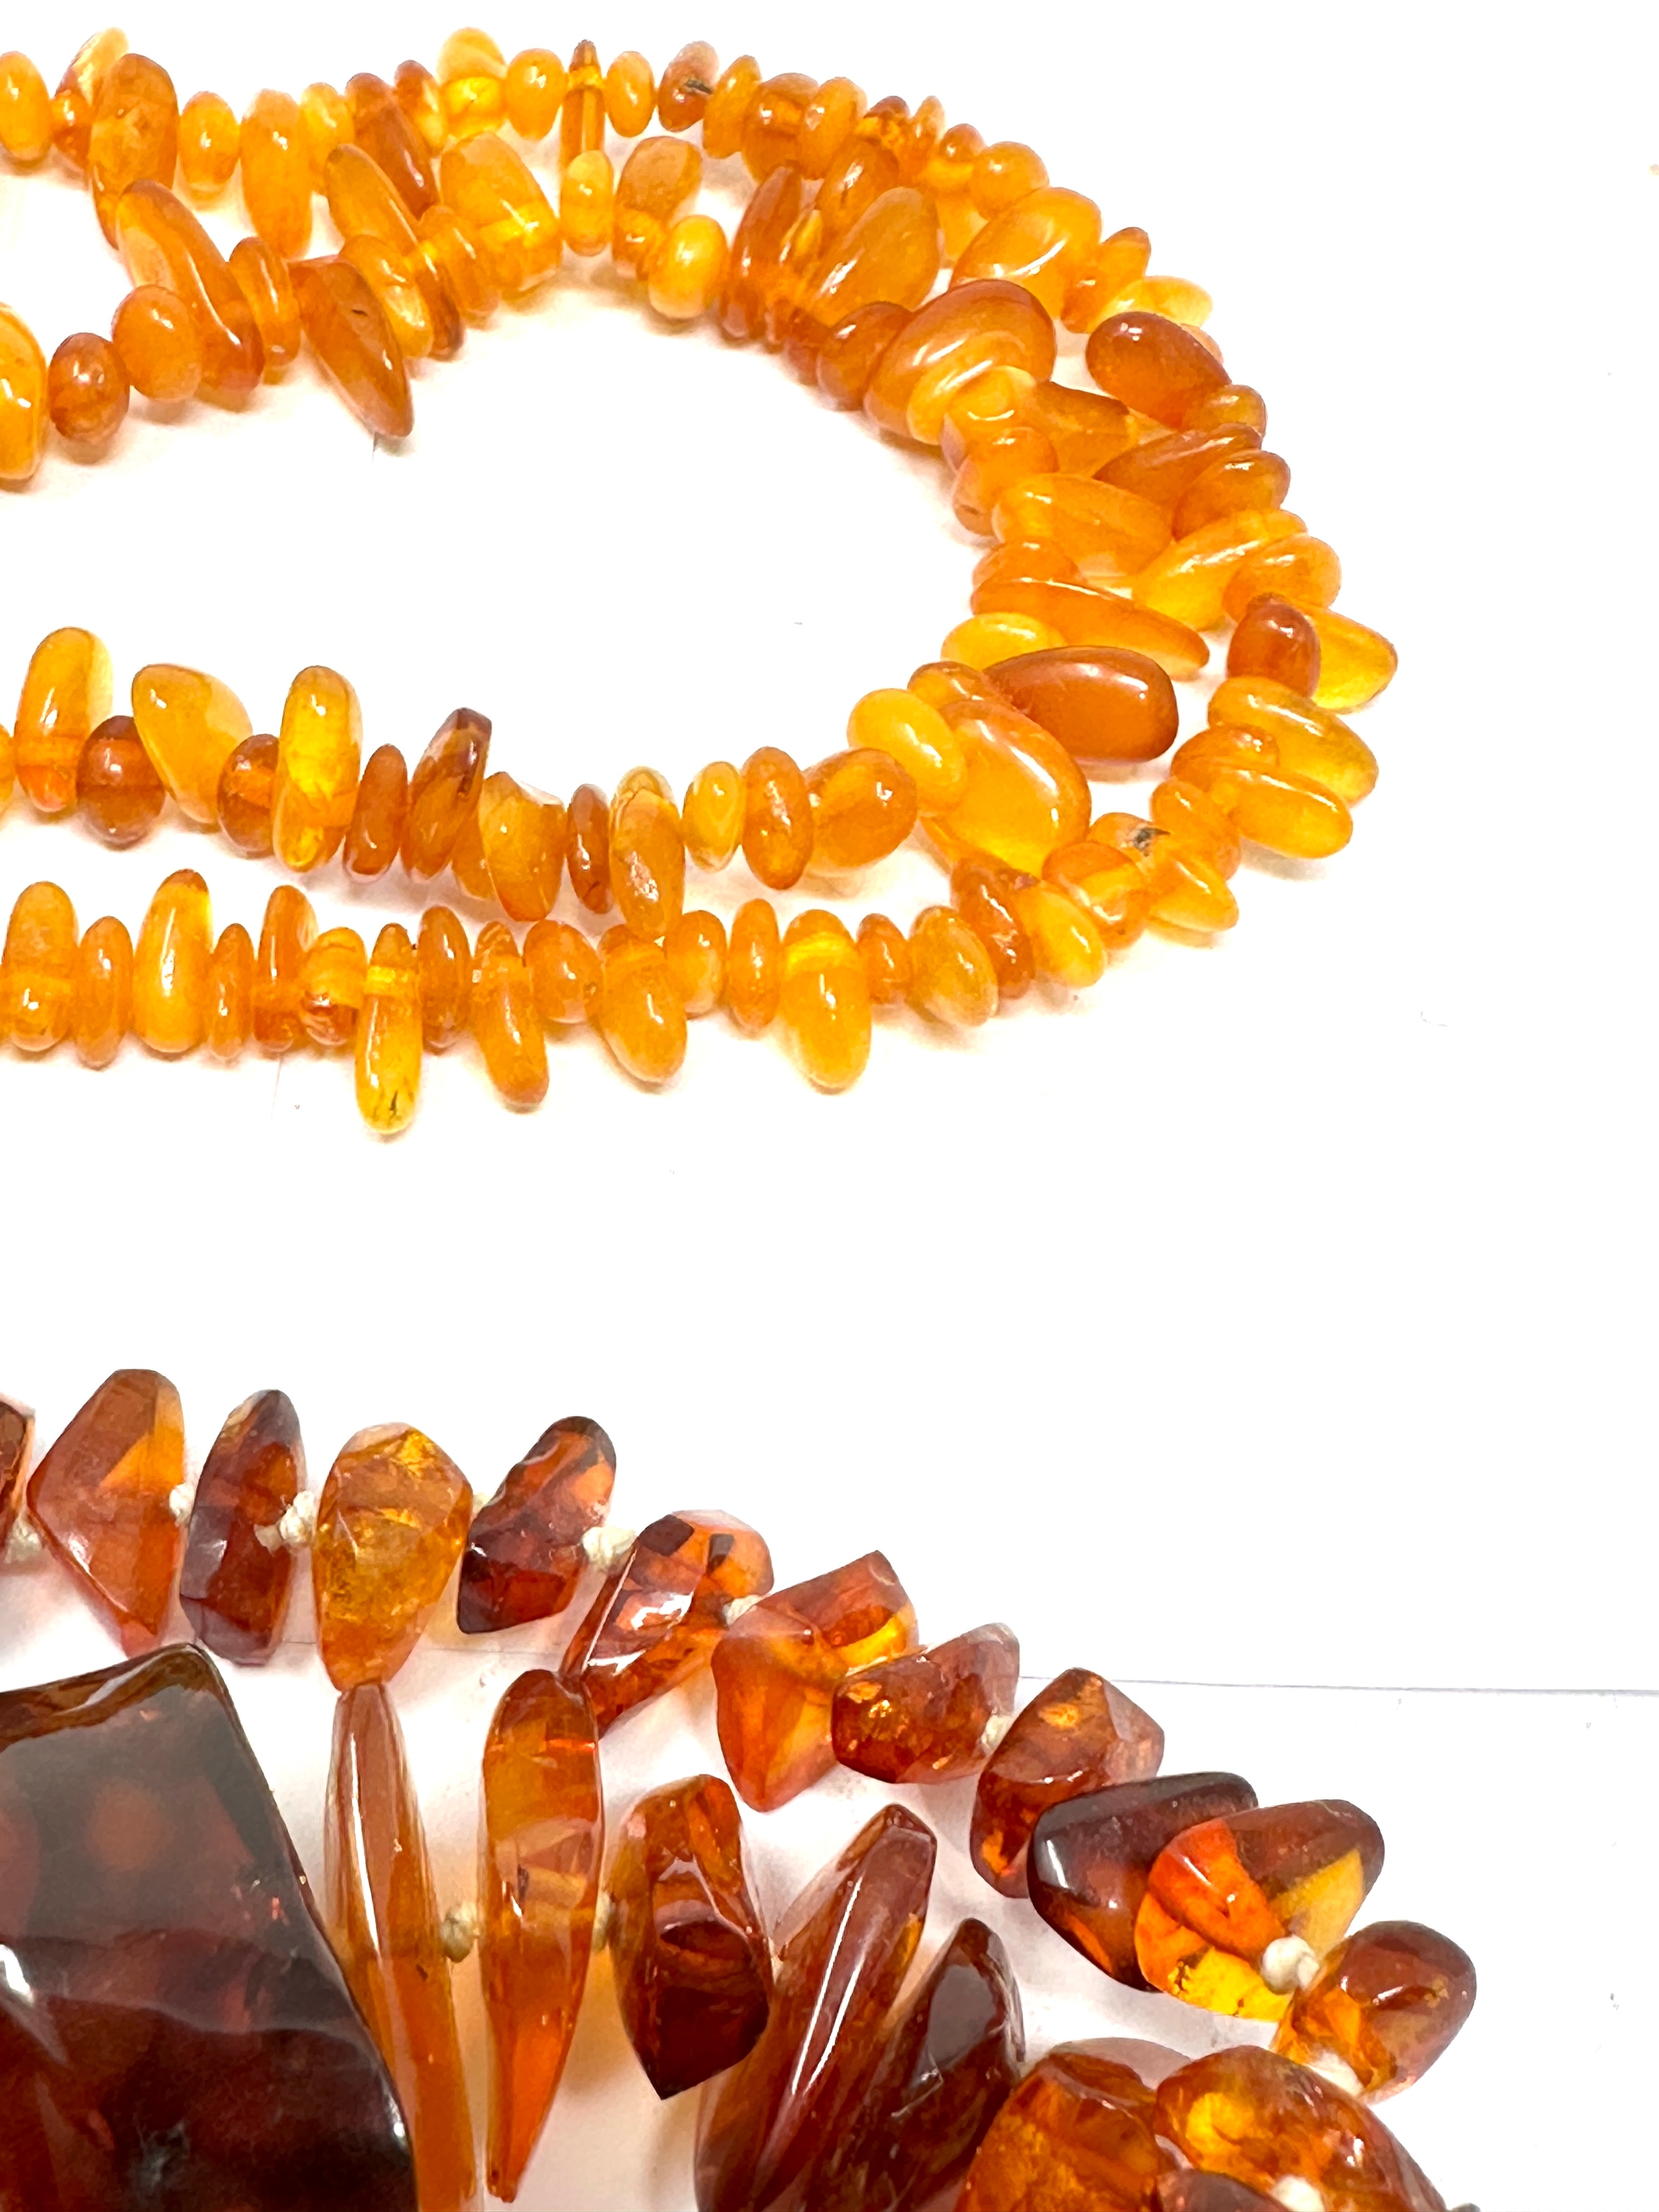 Amber jewellery necklaces weight 104g - Image 4 of 4